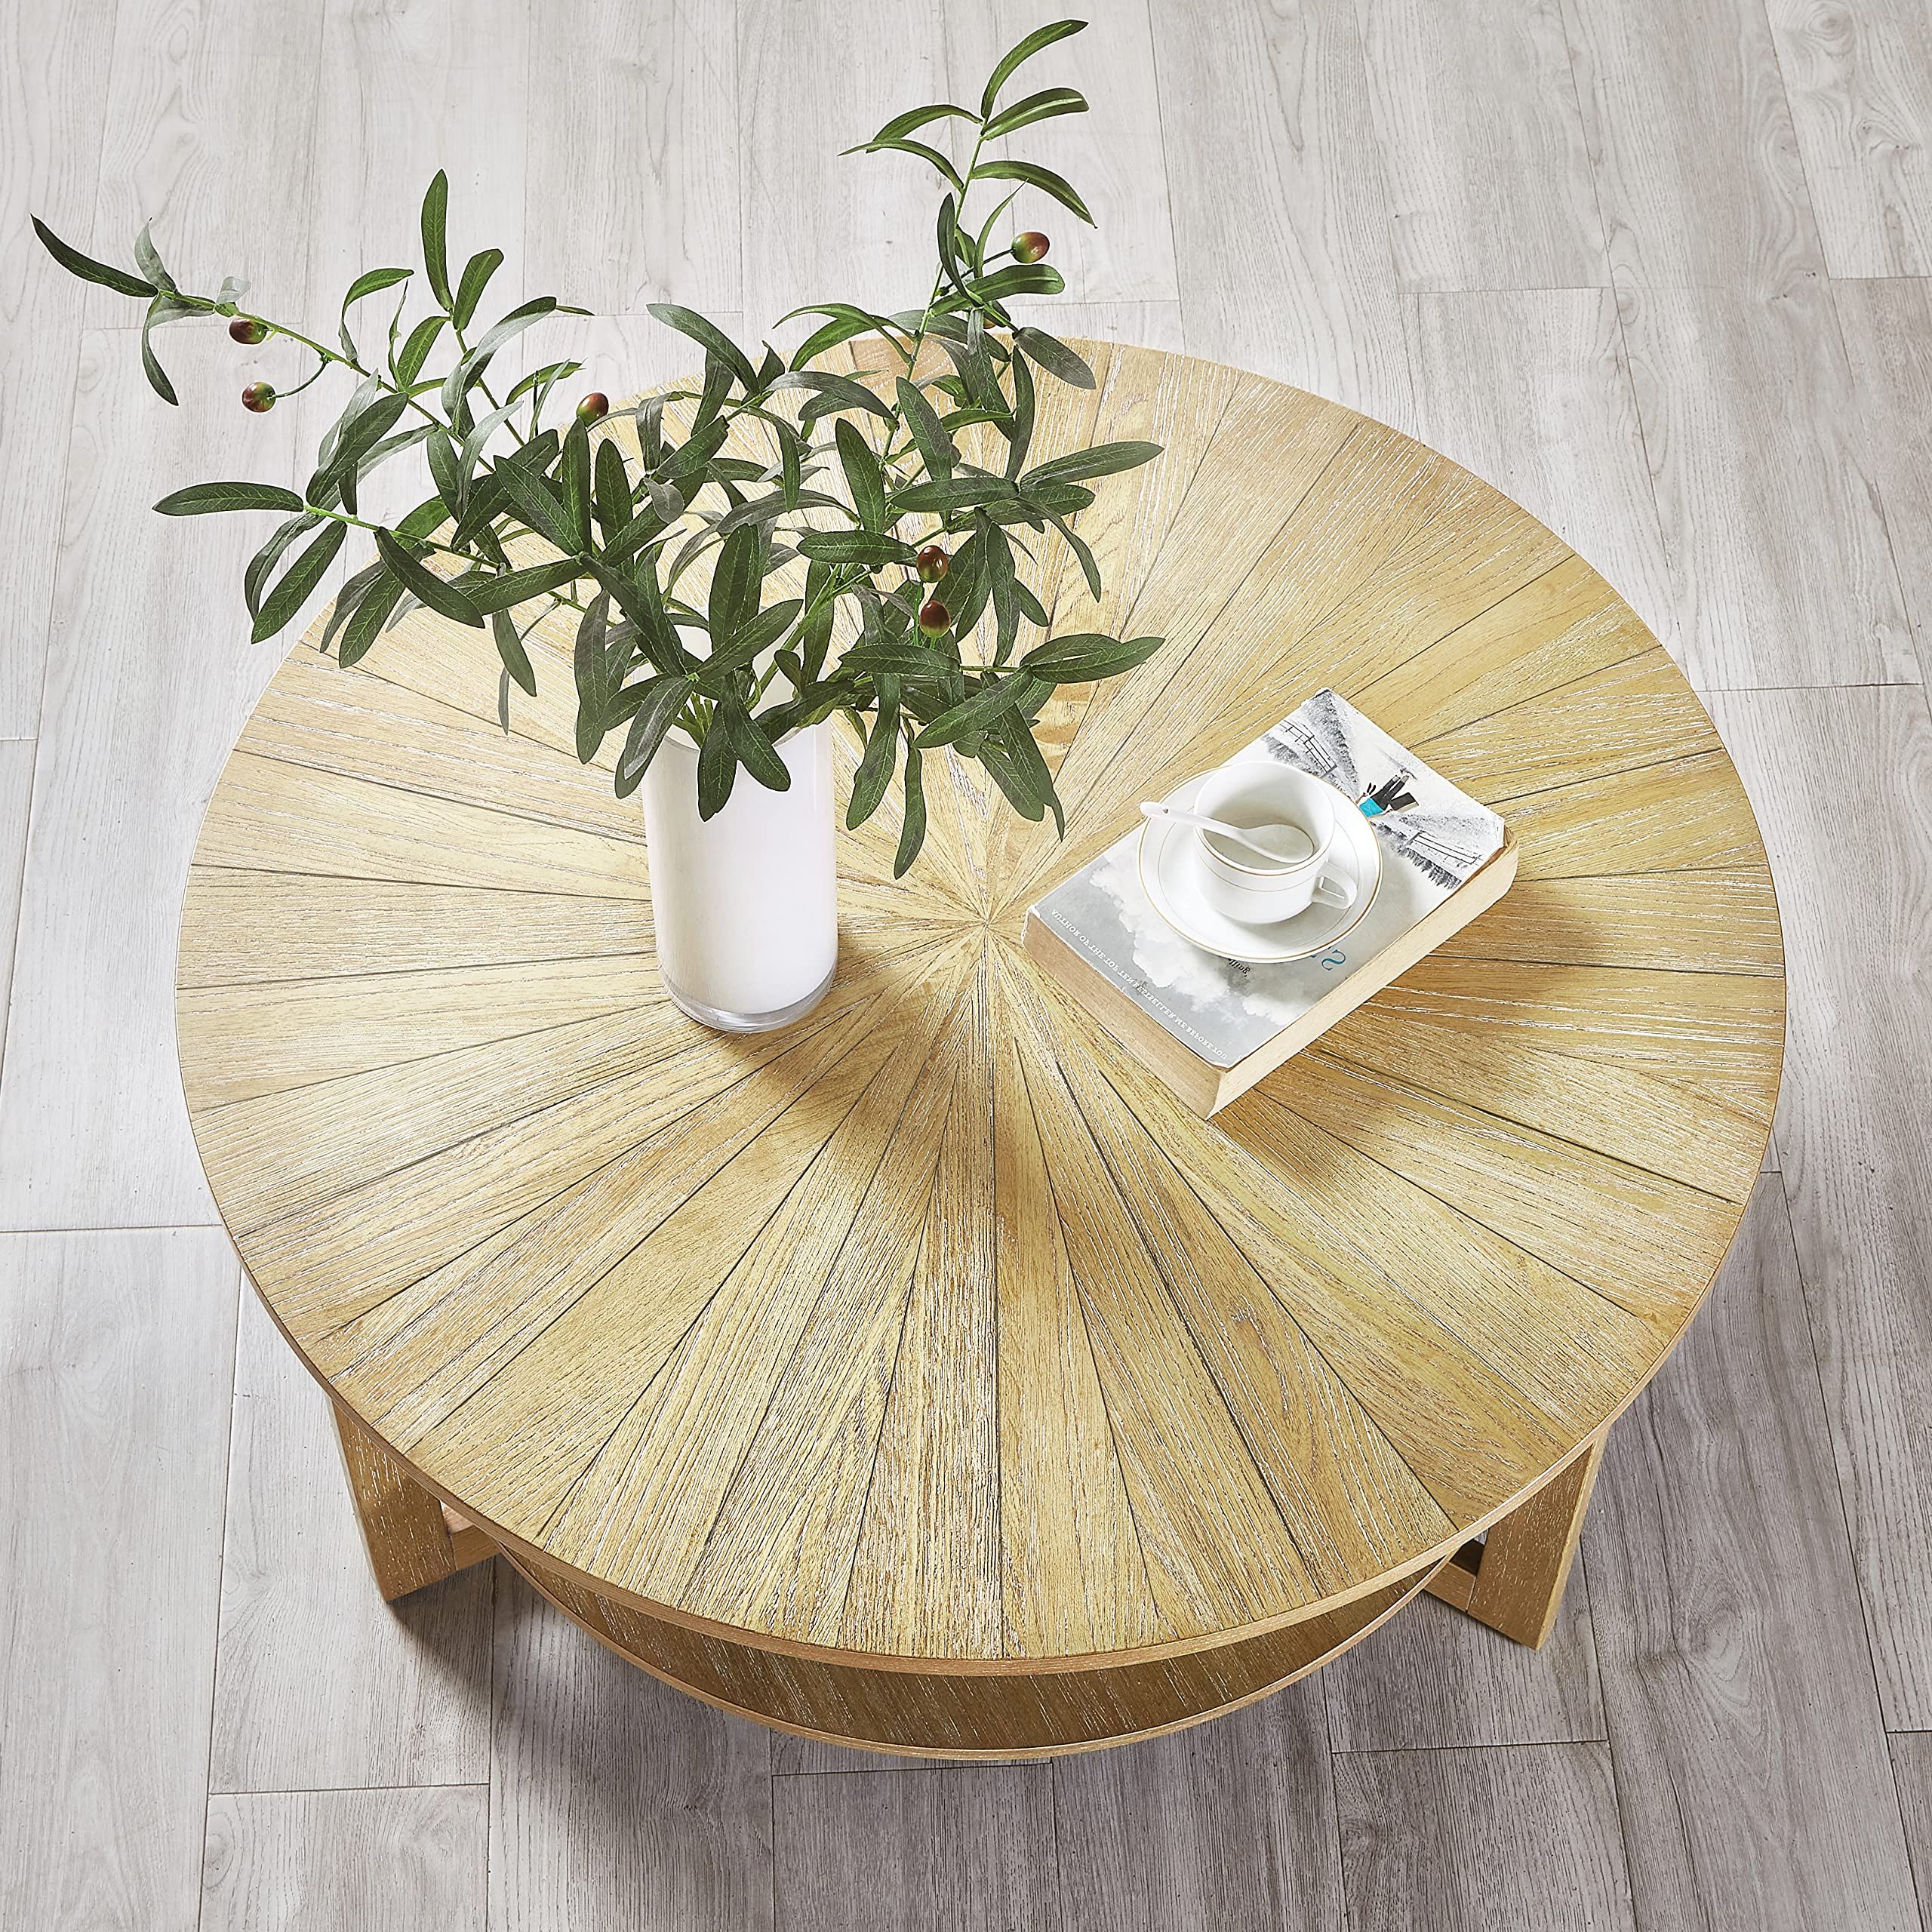 Latest Coffee Tables With Round Wooden Tops In Gexpusm Round Oak Wood Coffee Table, Farmhouse Coffee Table For Living  Room, Solid Wood Circle Center Table, 2 Tier Round Wooden Rustic Natural  Table, 35.3" D X17.8 H : Amazon.au: Home (Photo 2 of 10)